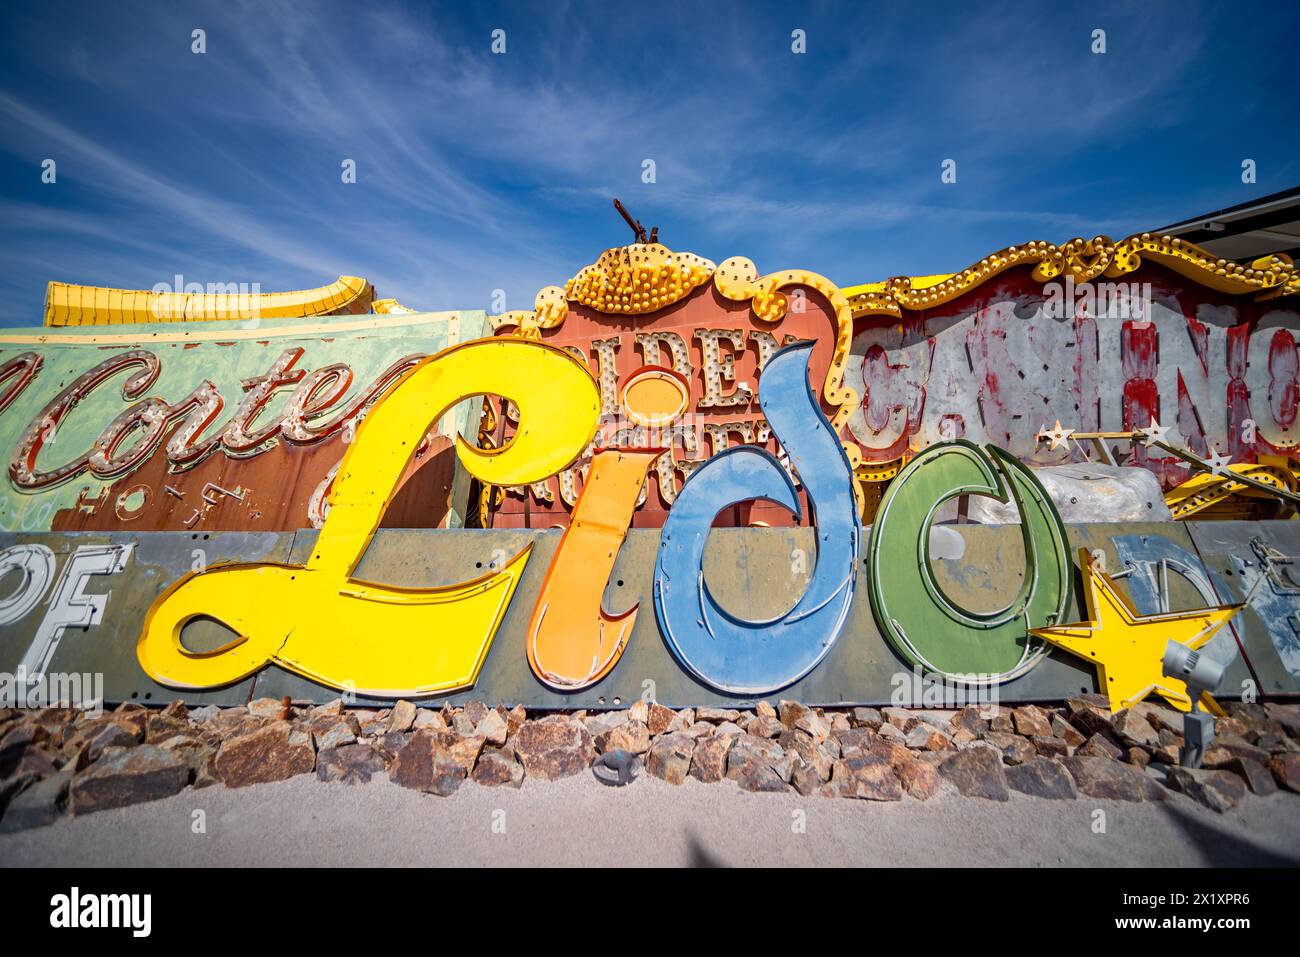 Abandoned and discarded neon sign of Lido in the Neon Museum aka Neon boneyard in Las Vegas, Nevada. Stock Photo